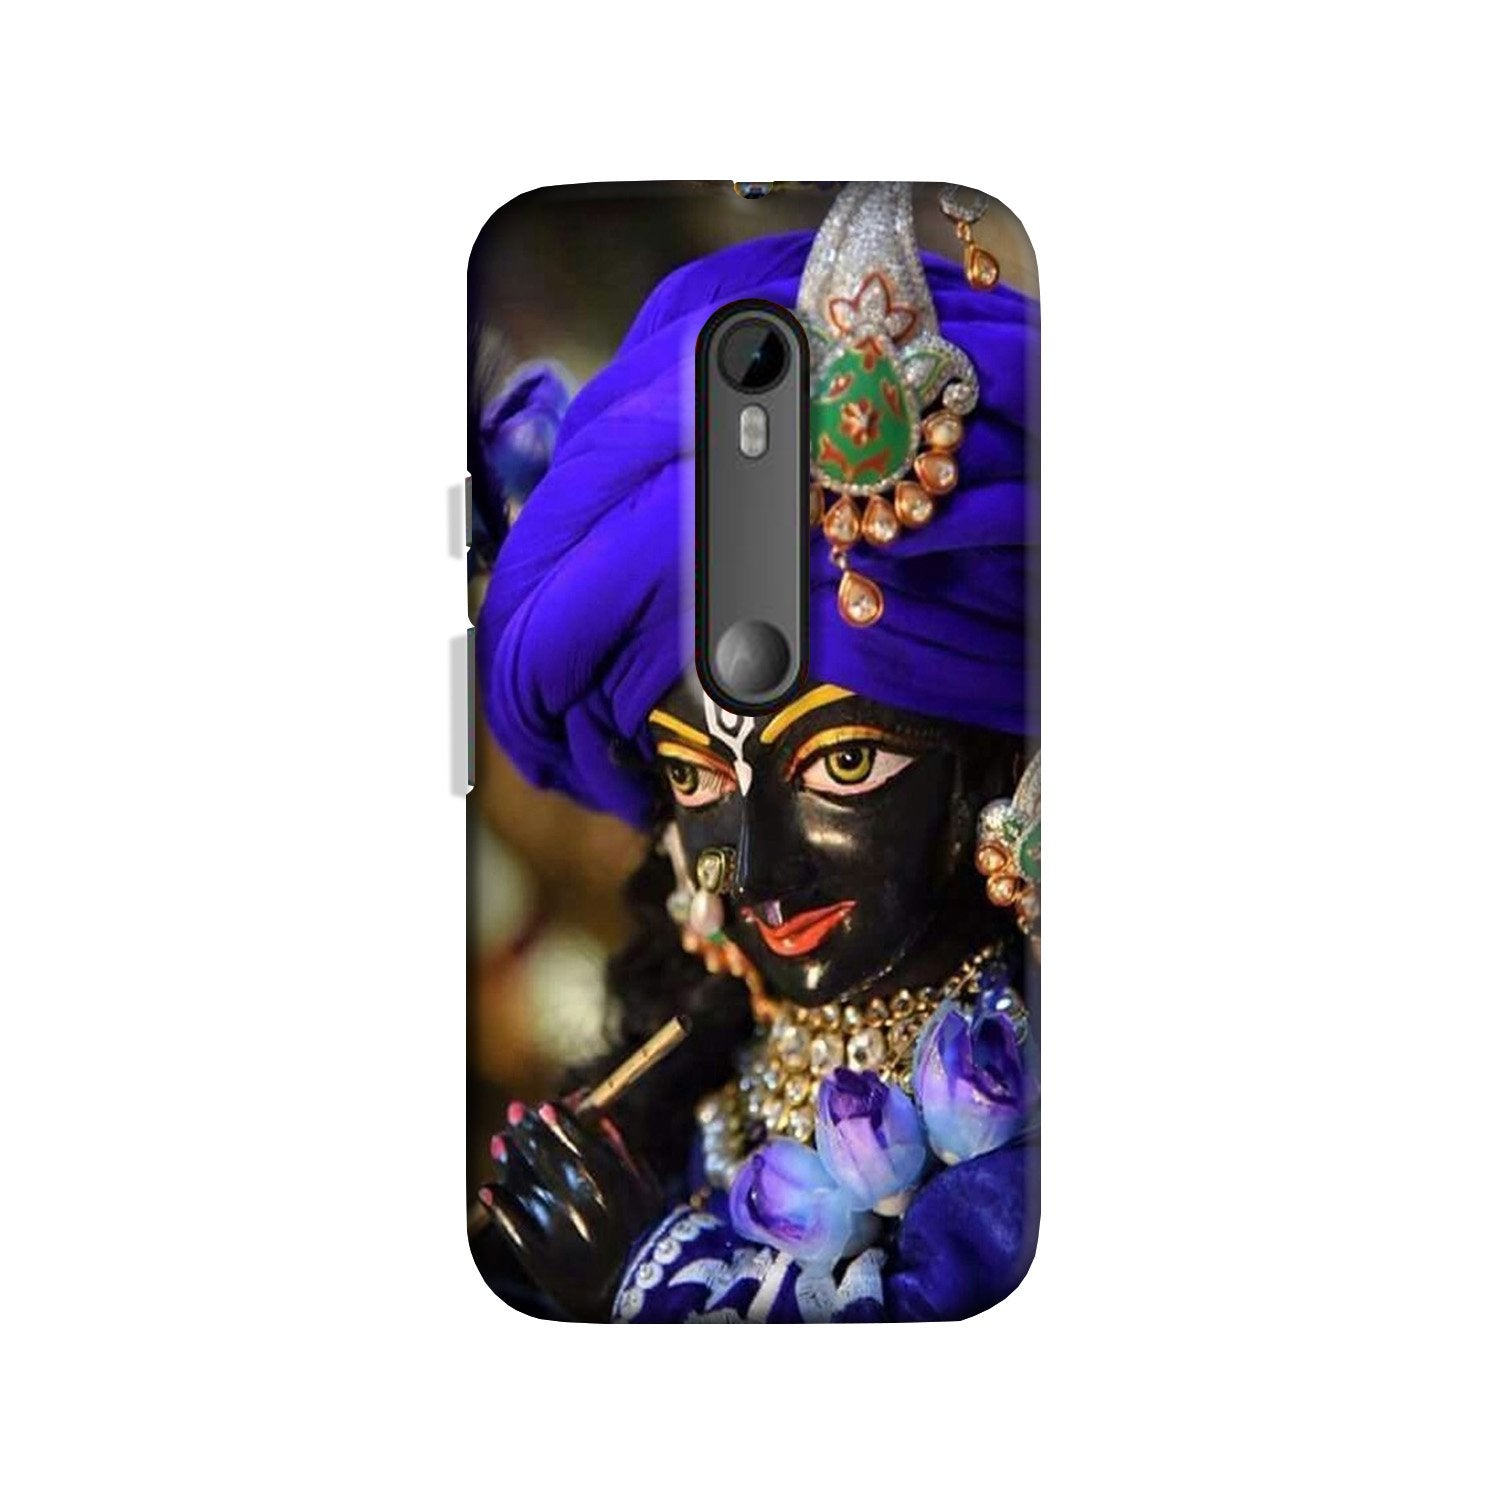 Lord Krishna4 Case for Moto X Force